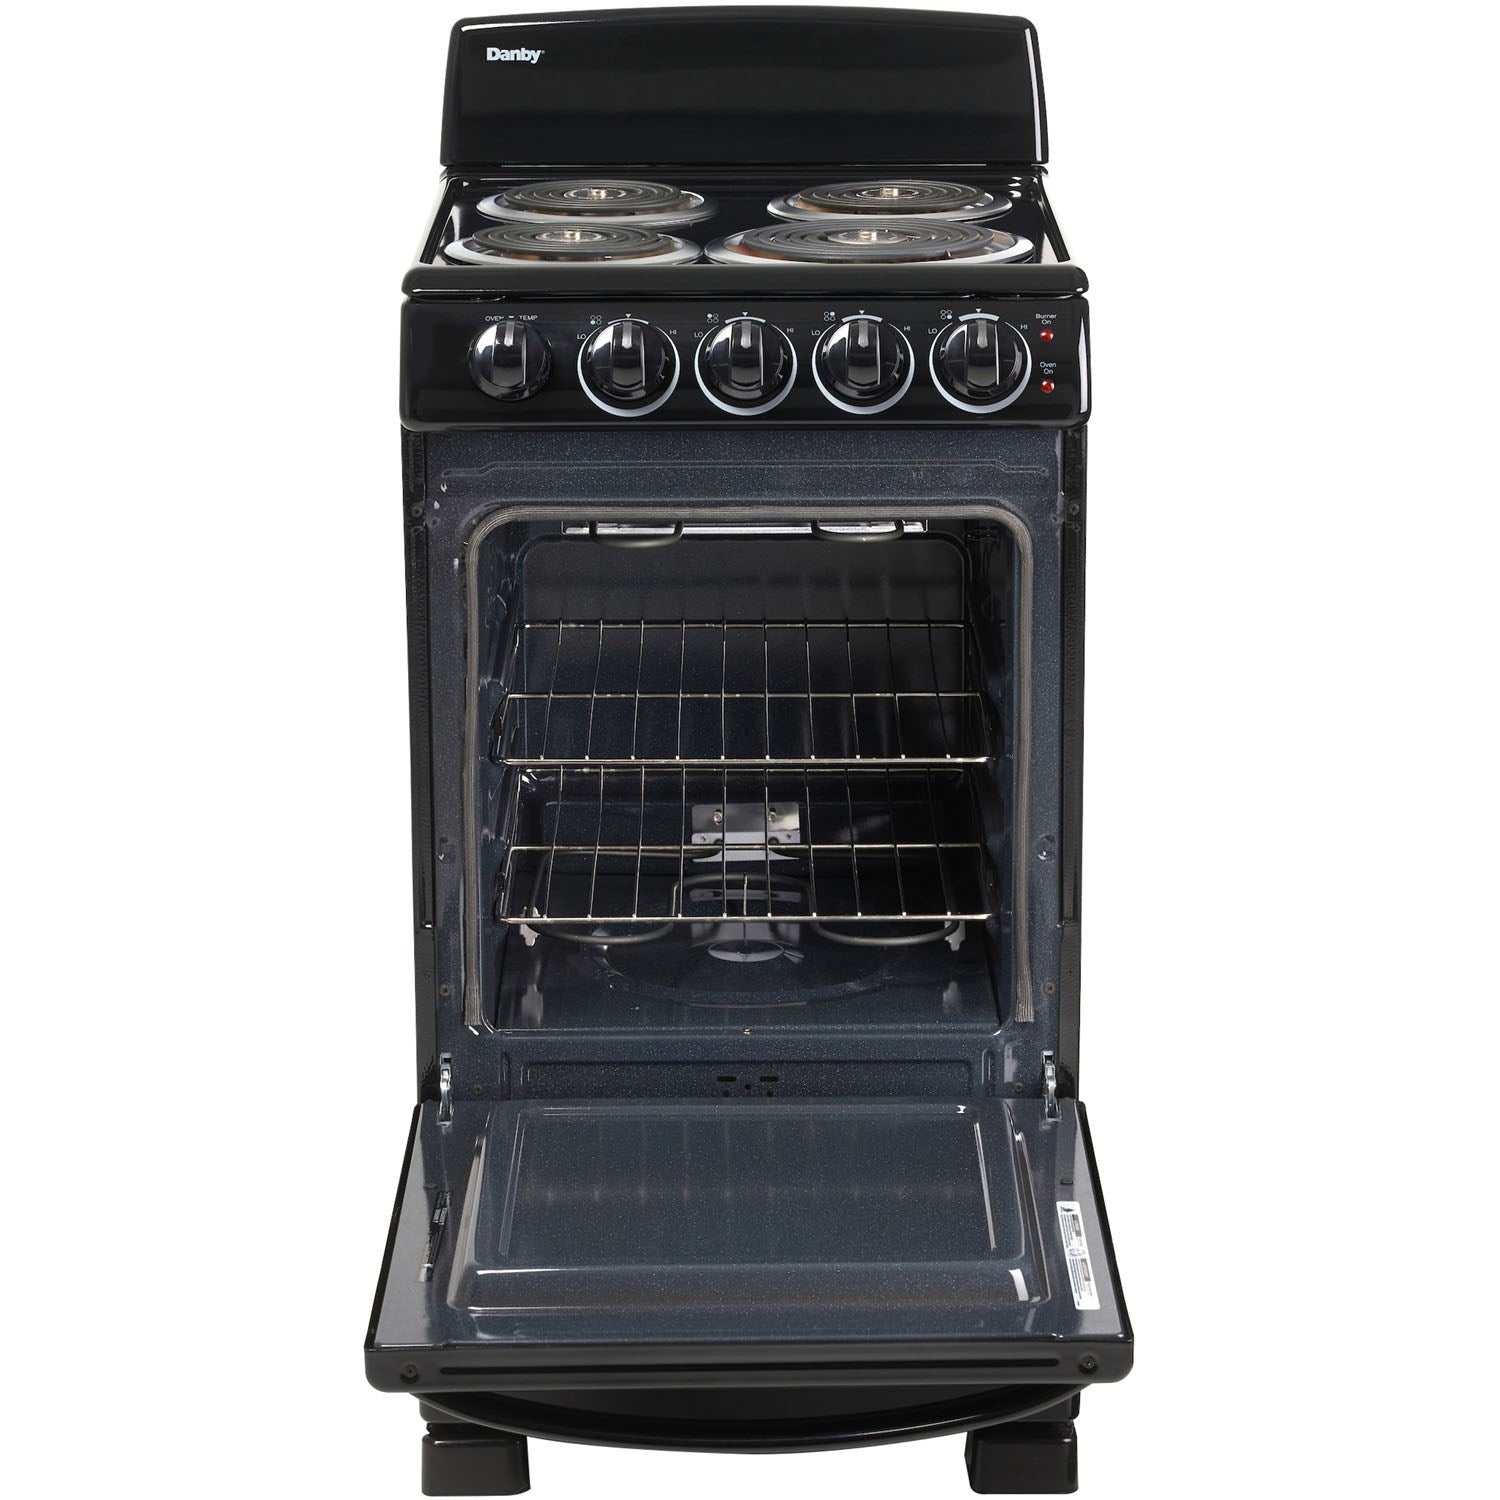 Danby - 20 inch Electric Range, Coil Elements,Push & Turn Safety Knobs,Manual Clean | DER202B